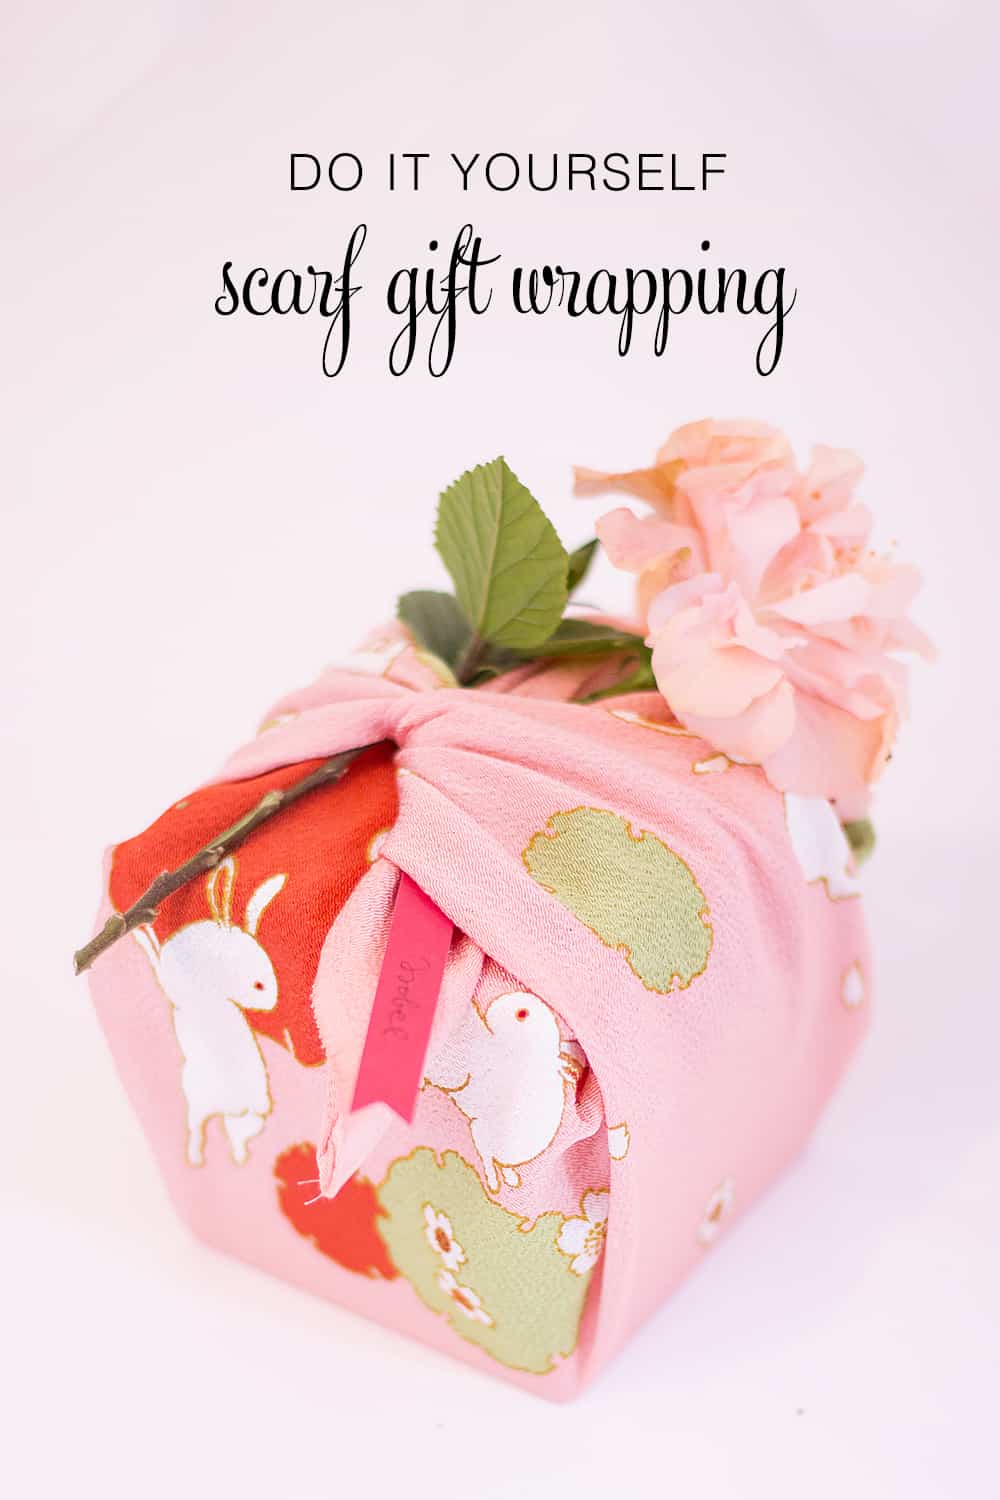 Gift wrapping with an old scarf